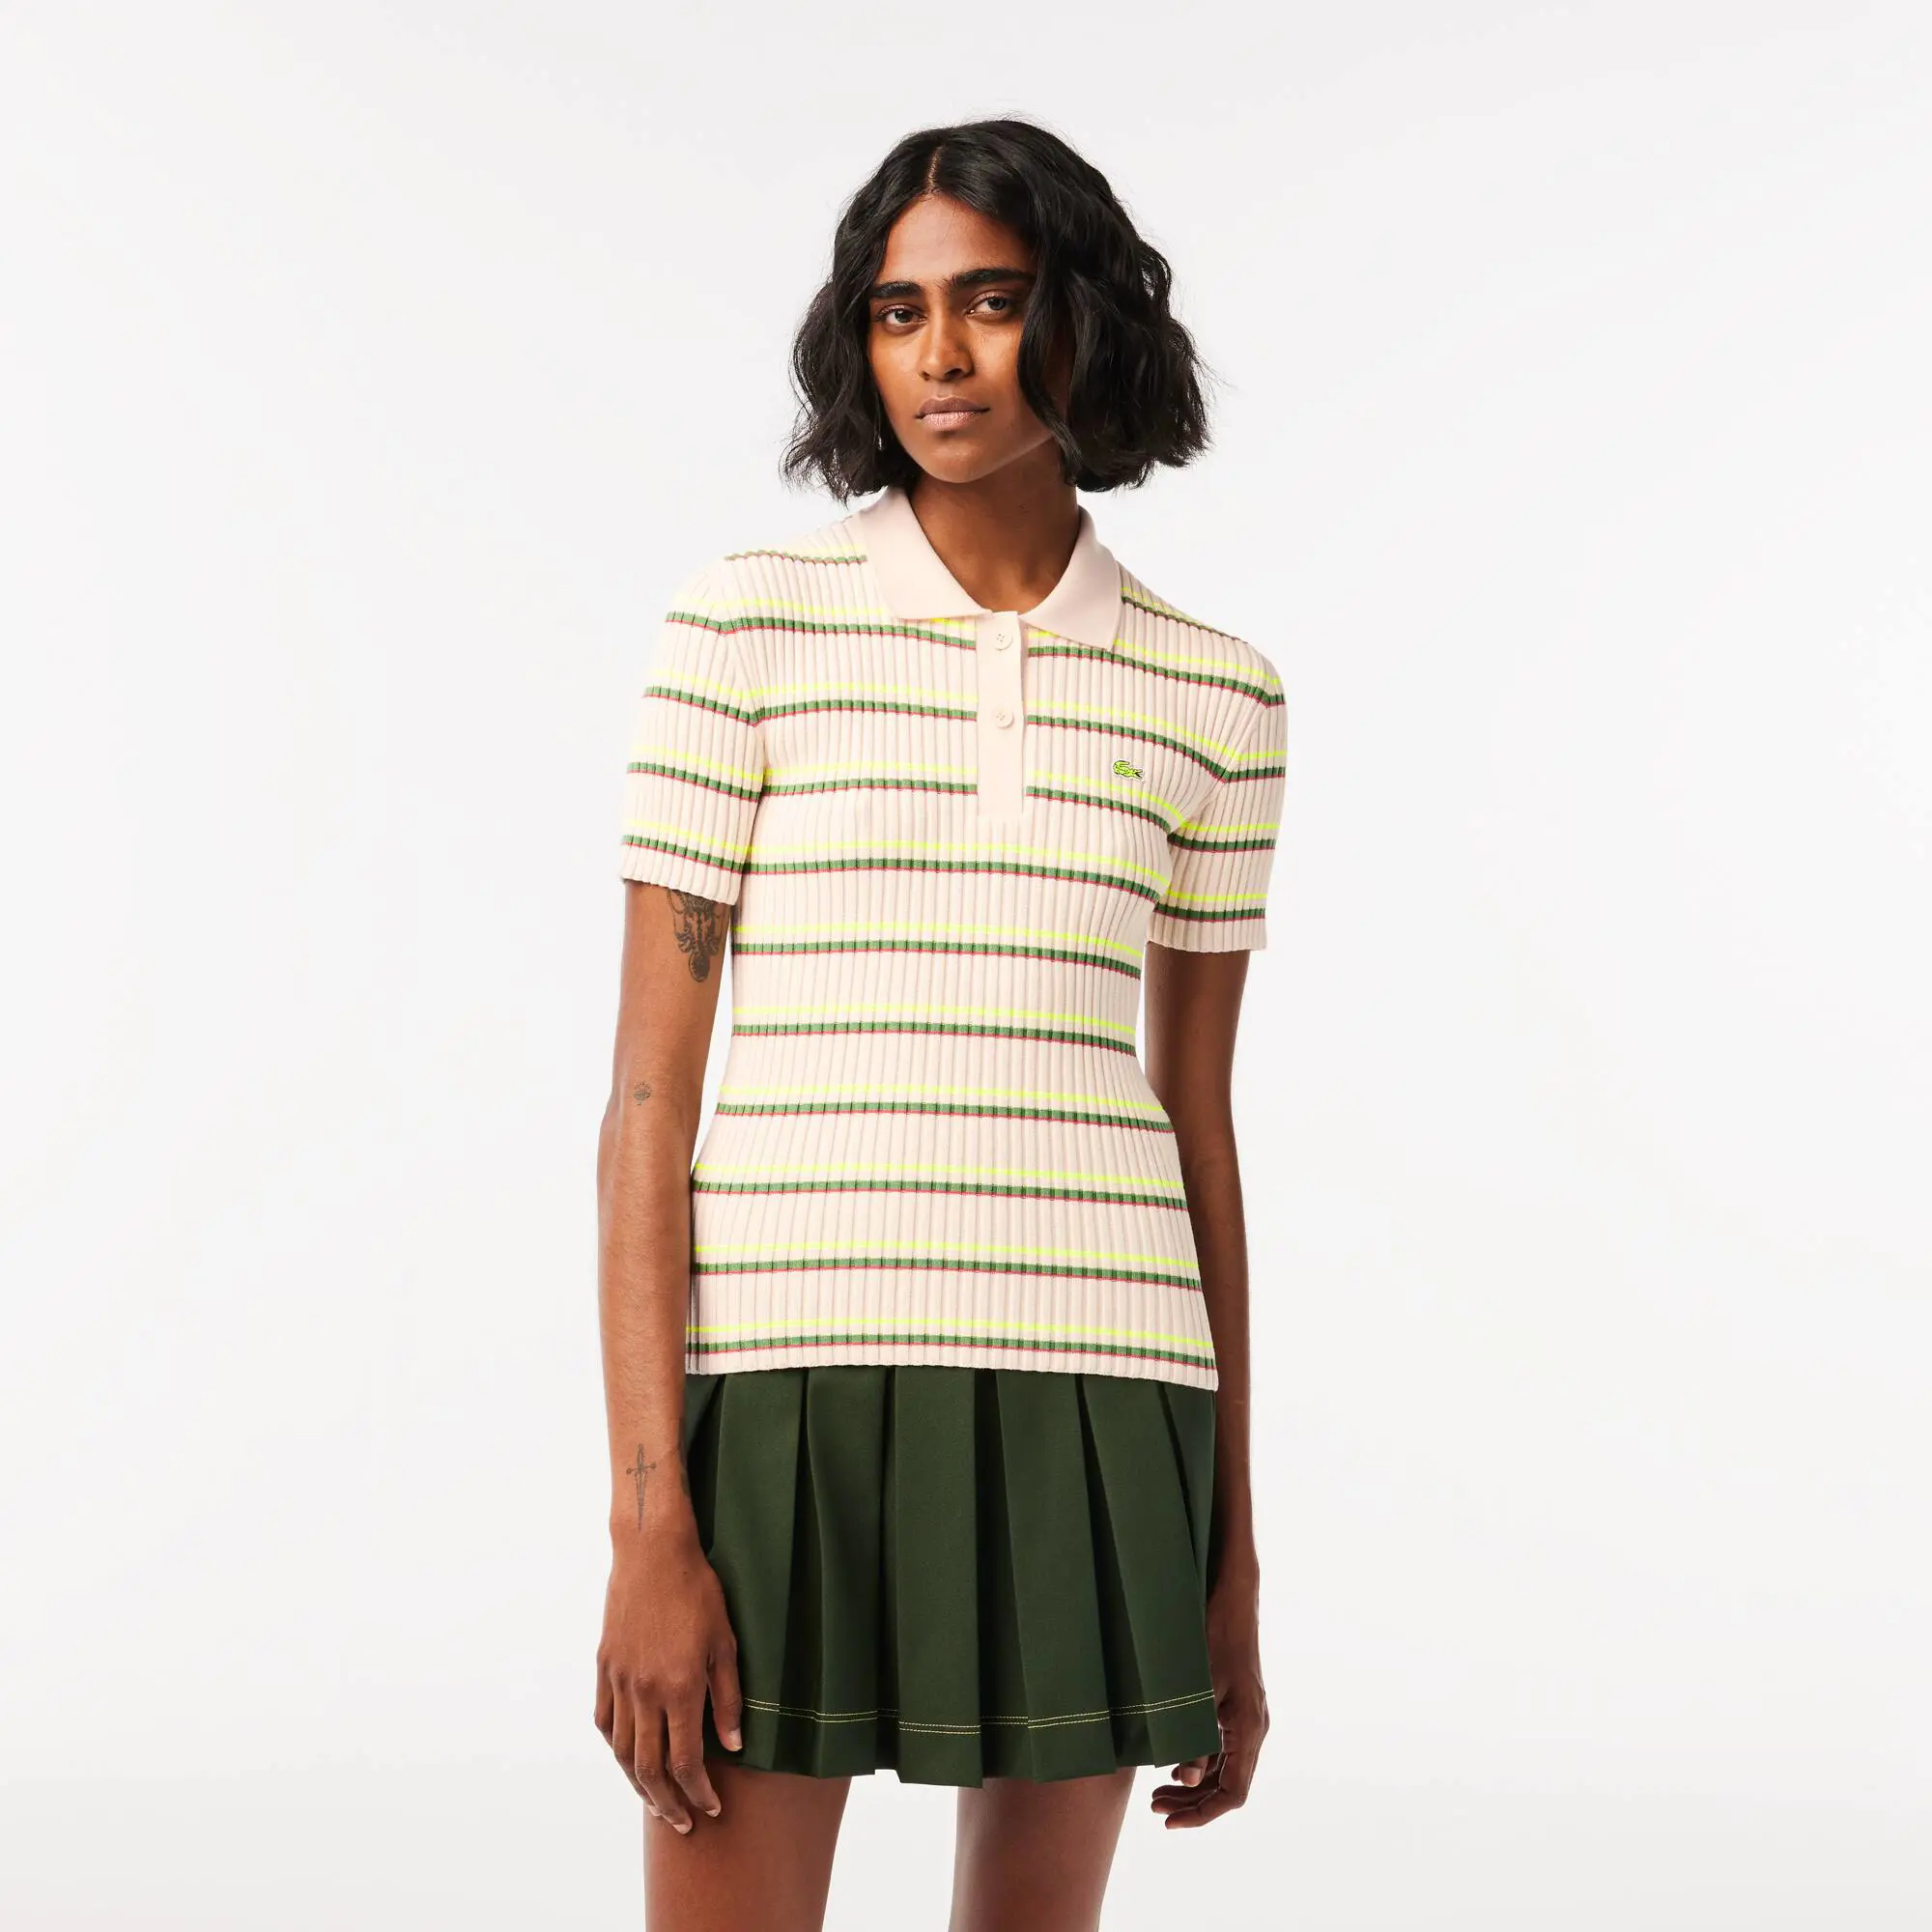 Lacoste Women’s Made In France Organic Cotton Striped Polo. 1